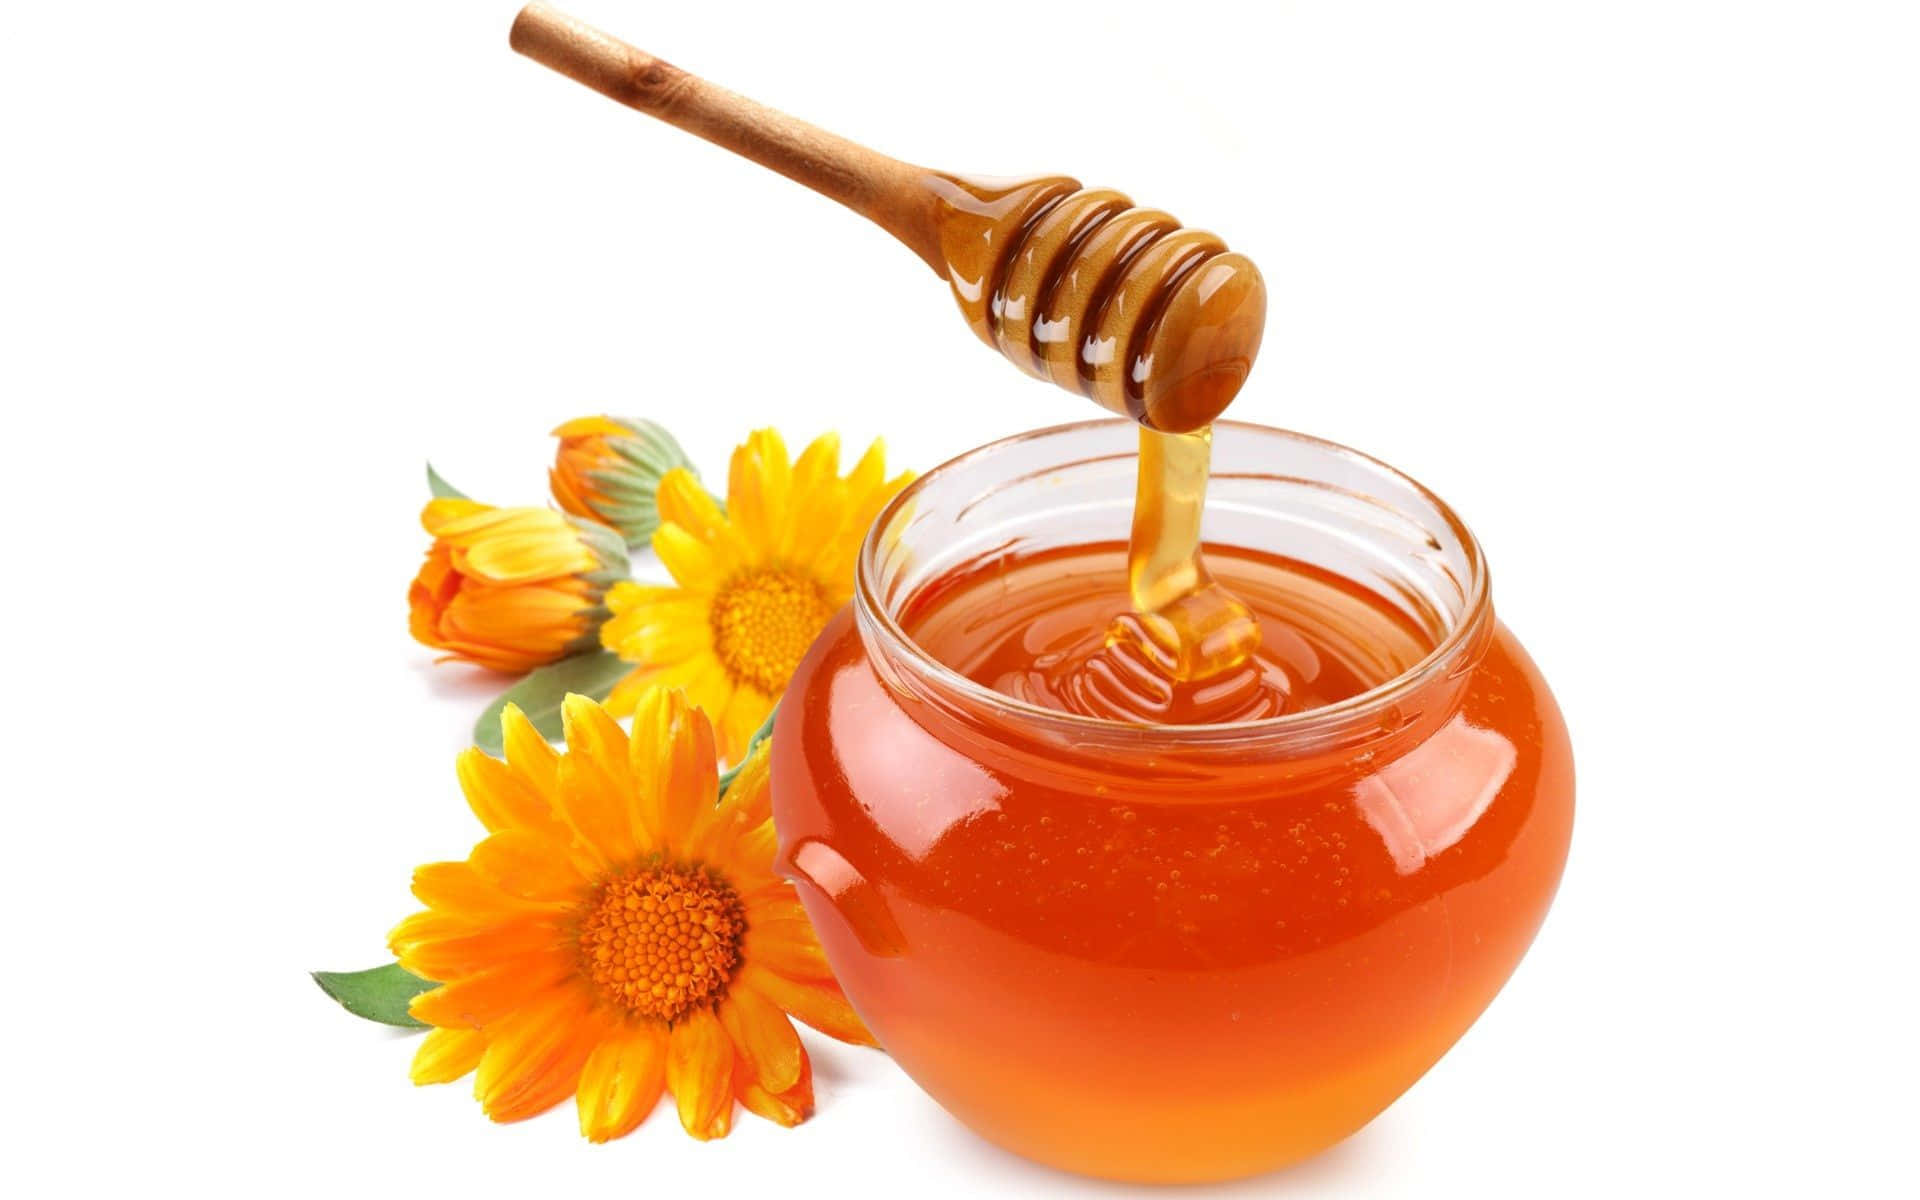 Honey Is Poured Into A Jar With Sunflowers